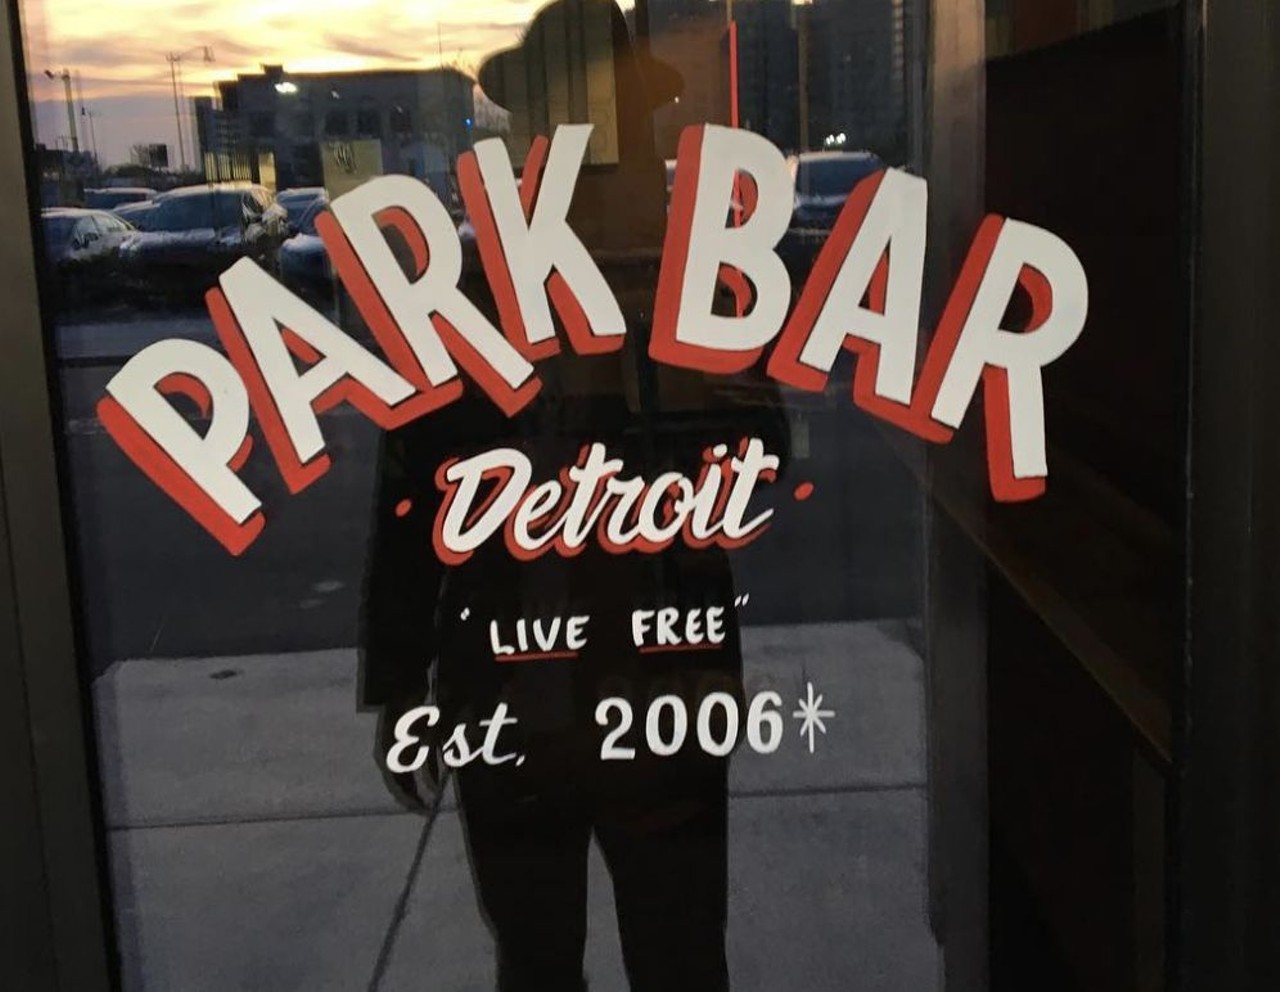 Park bar
2040 Park Ave., Detroit; 313-962-2933
After 11 years in business, this downtown Detroit bar abruptly announced it would close for good at the end of the year. No reason was given for the closure, but Cliff Bell&#146;s co-owner Paul Howard confirmed that he and his business partner Scott Lowell bought the place. They close briefly for renovations before re-opening with a new concept.